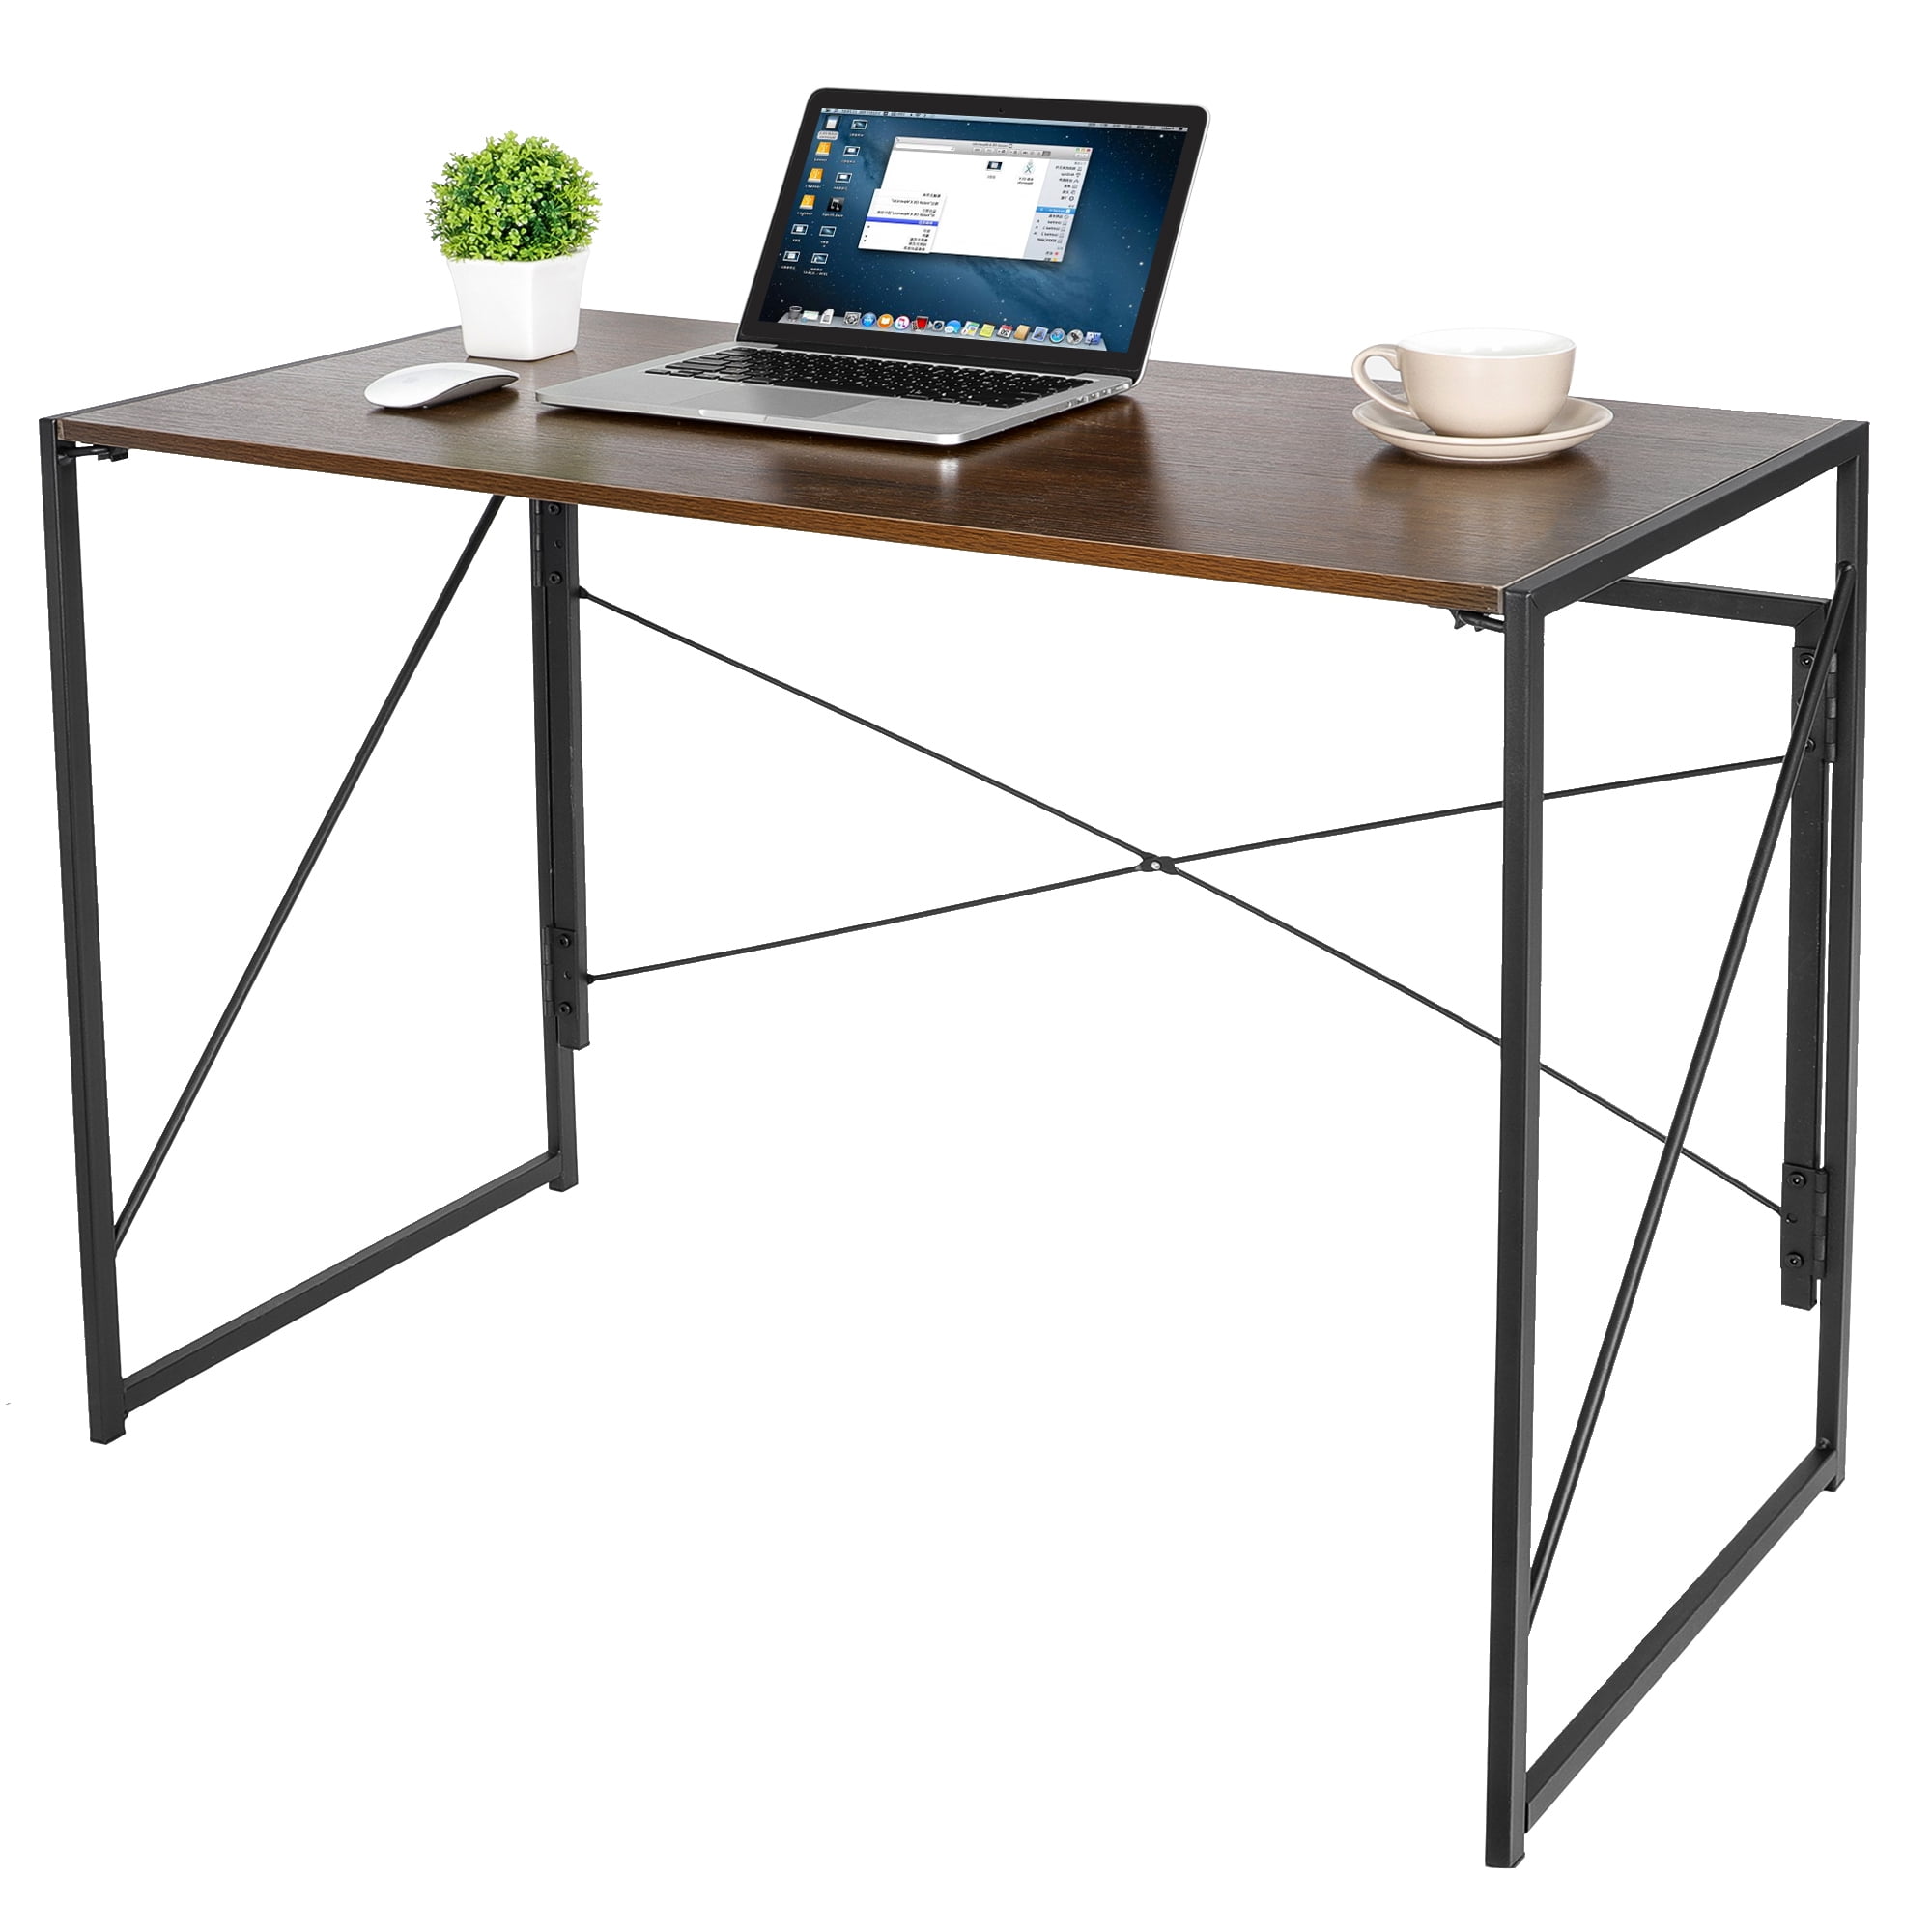 Folding Computer Study Desk Space Saver Home Office Desk Laptop Writing Table 